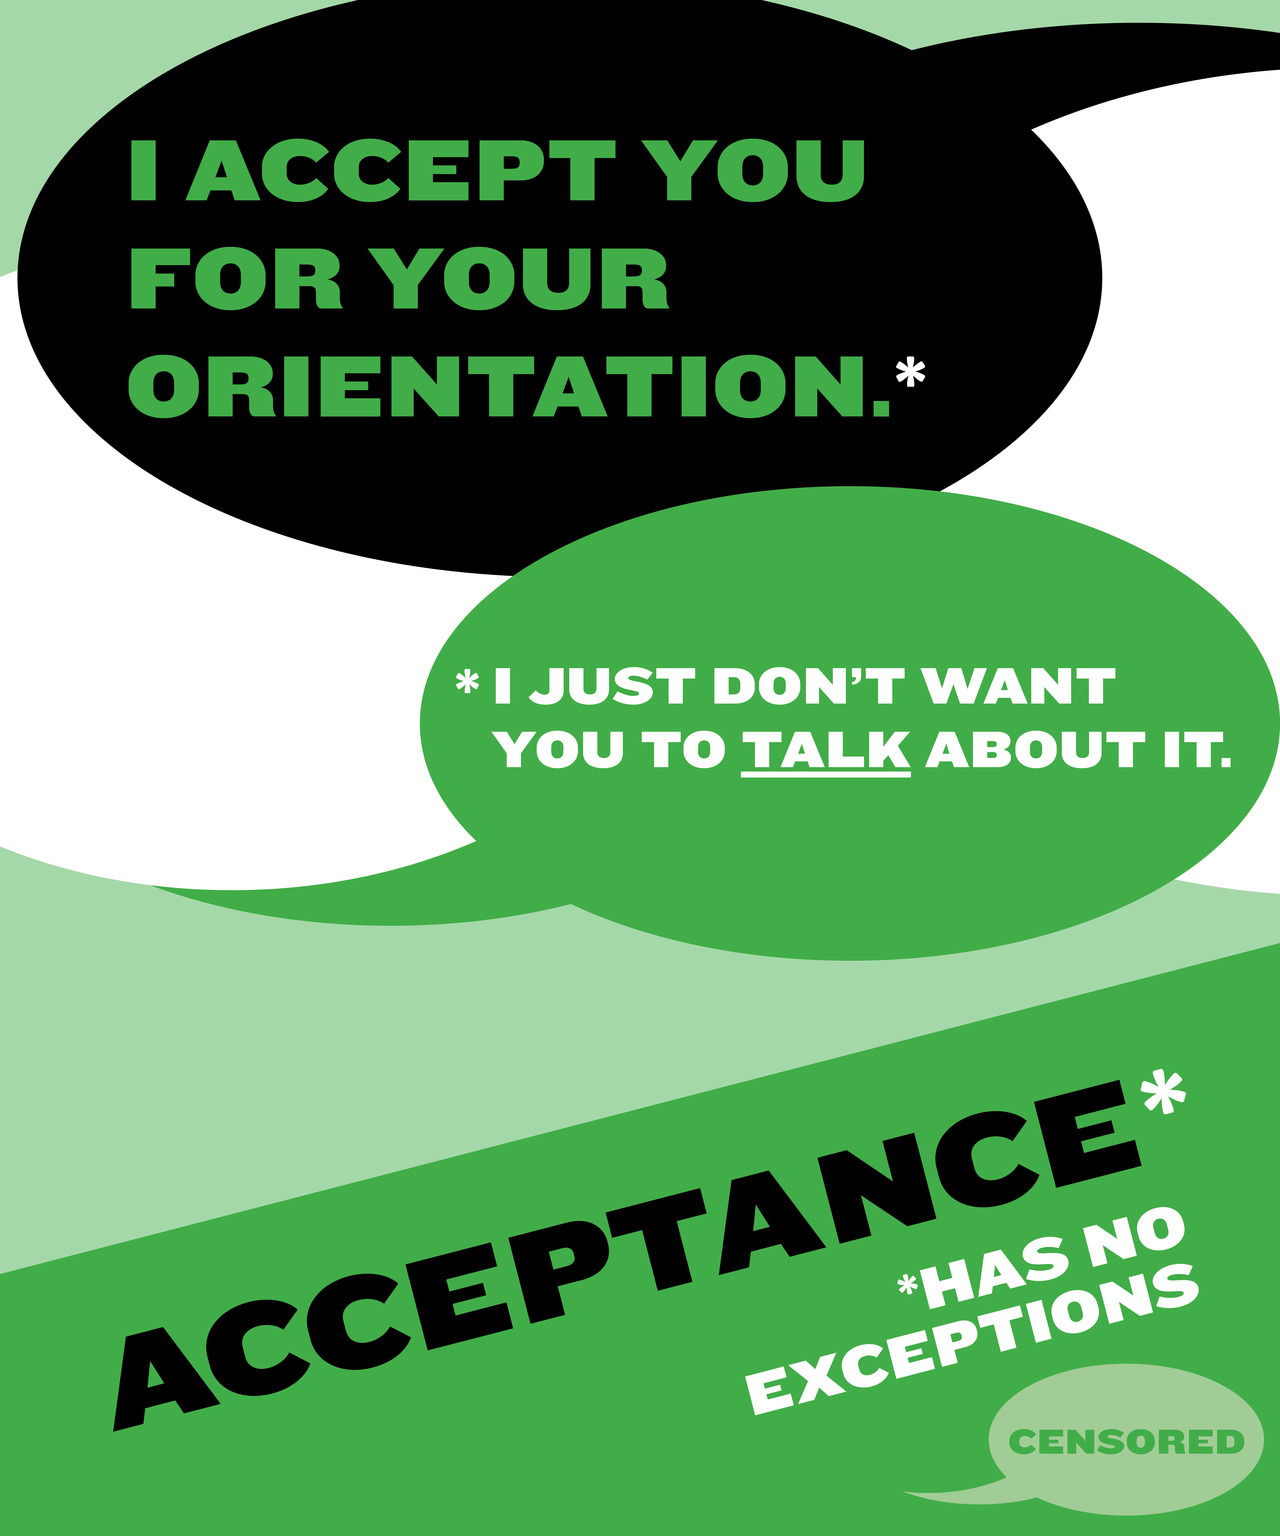 asexual-not-a-sexual:  I think this speaks for itself. Accepting a person doesn’t